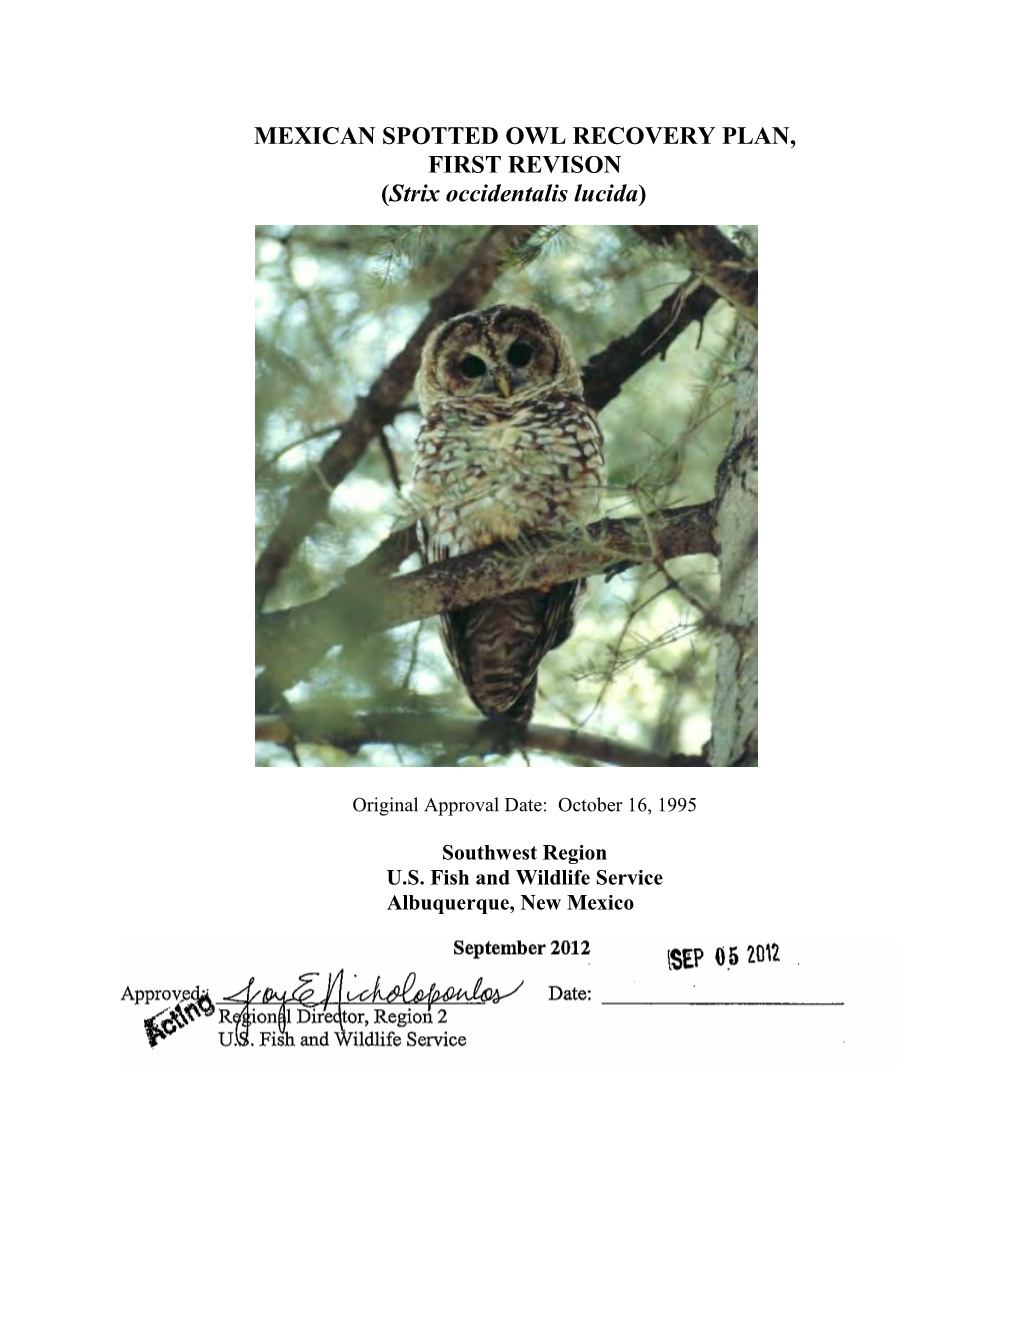 Mexican Spotted Owl Recovery Plan, First Revision Responsibility Cost Estimate by FY (By $1,000S)